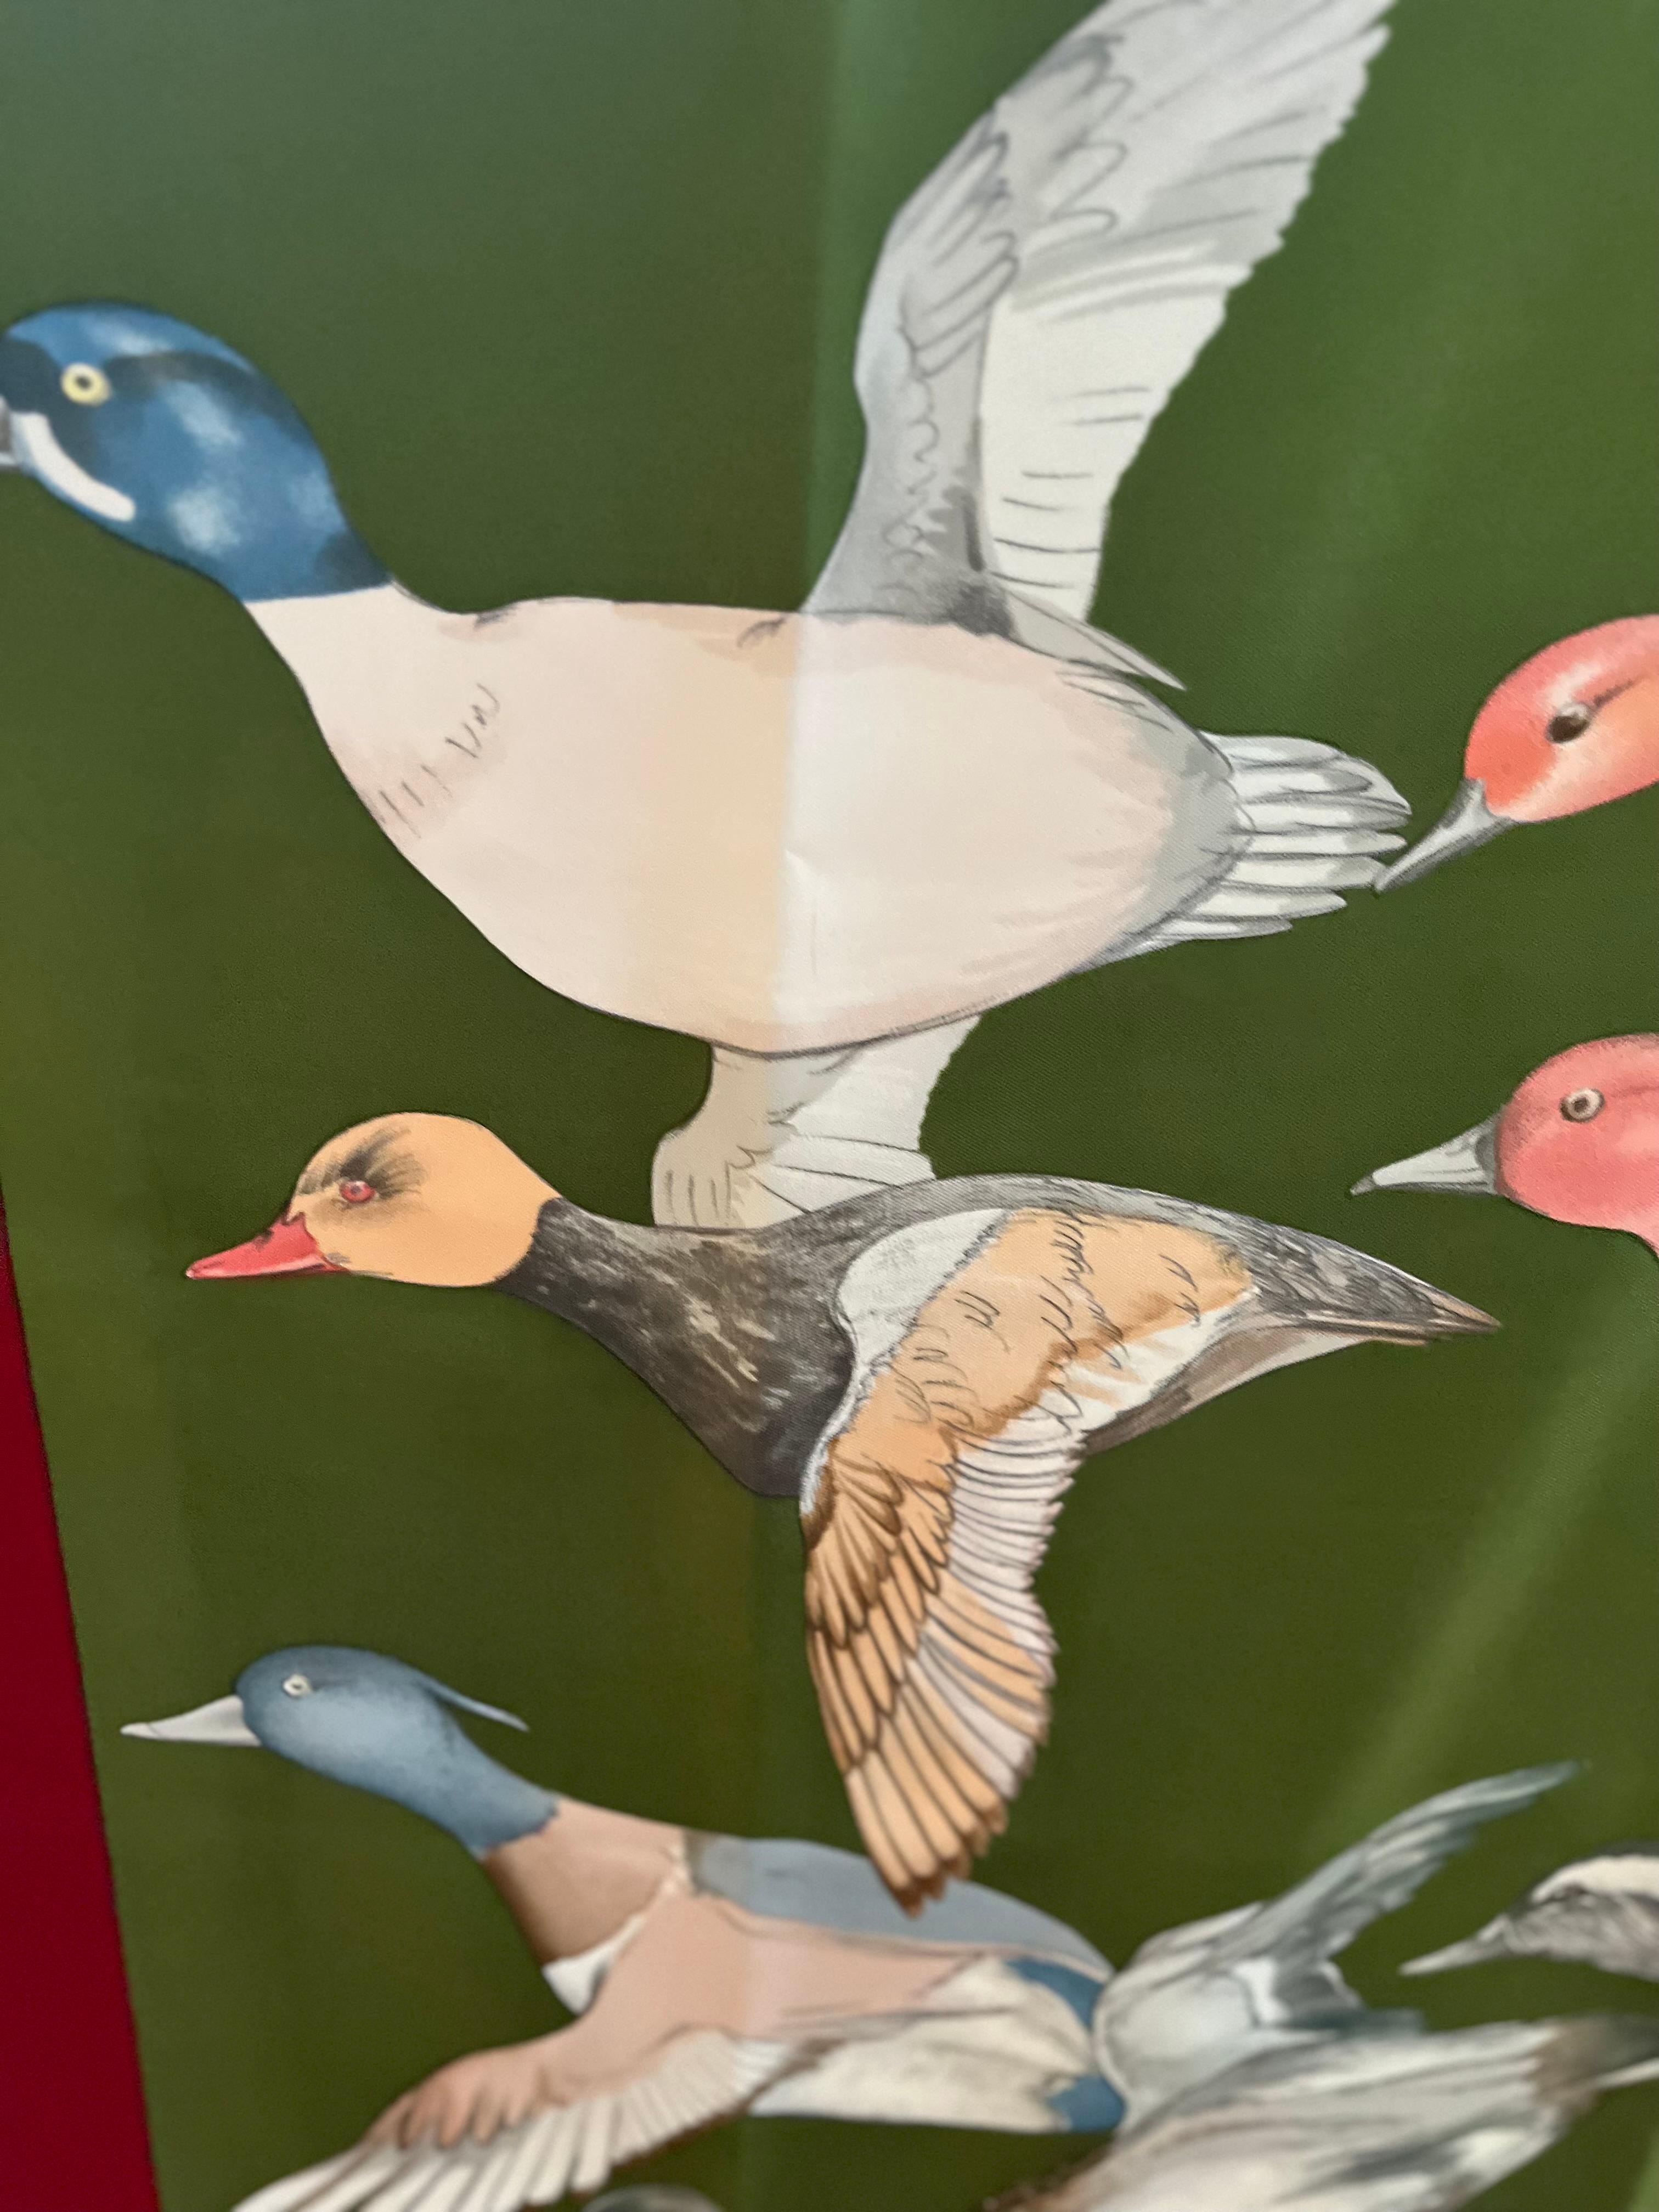 The translation is wild birds in flight, and indeed this design is all about birds. Looking at the design you can imagine them moving in the sky. This Hermes scarf was designed by Carl de Parcevaux in 1986/87 and is in great condition.
It was